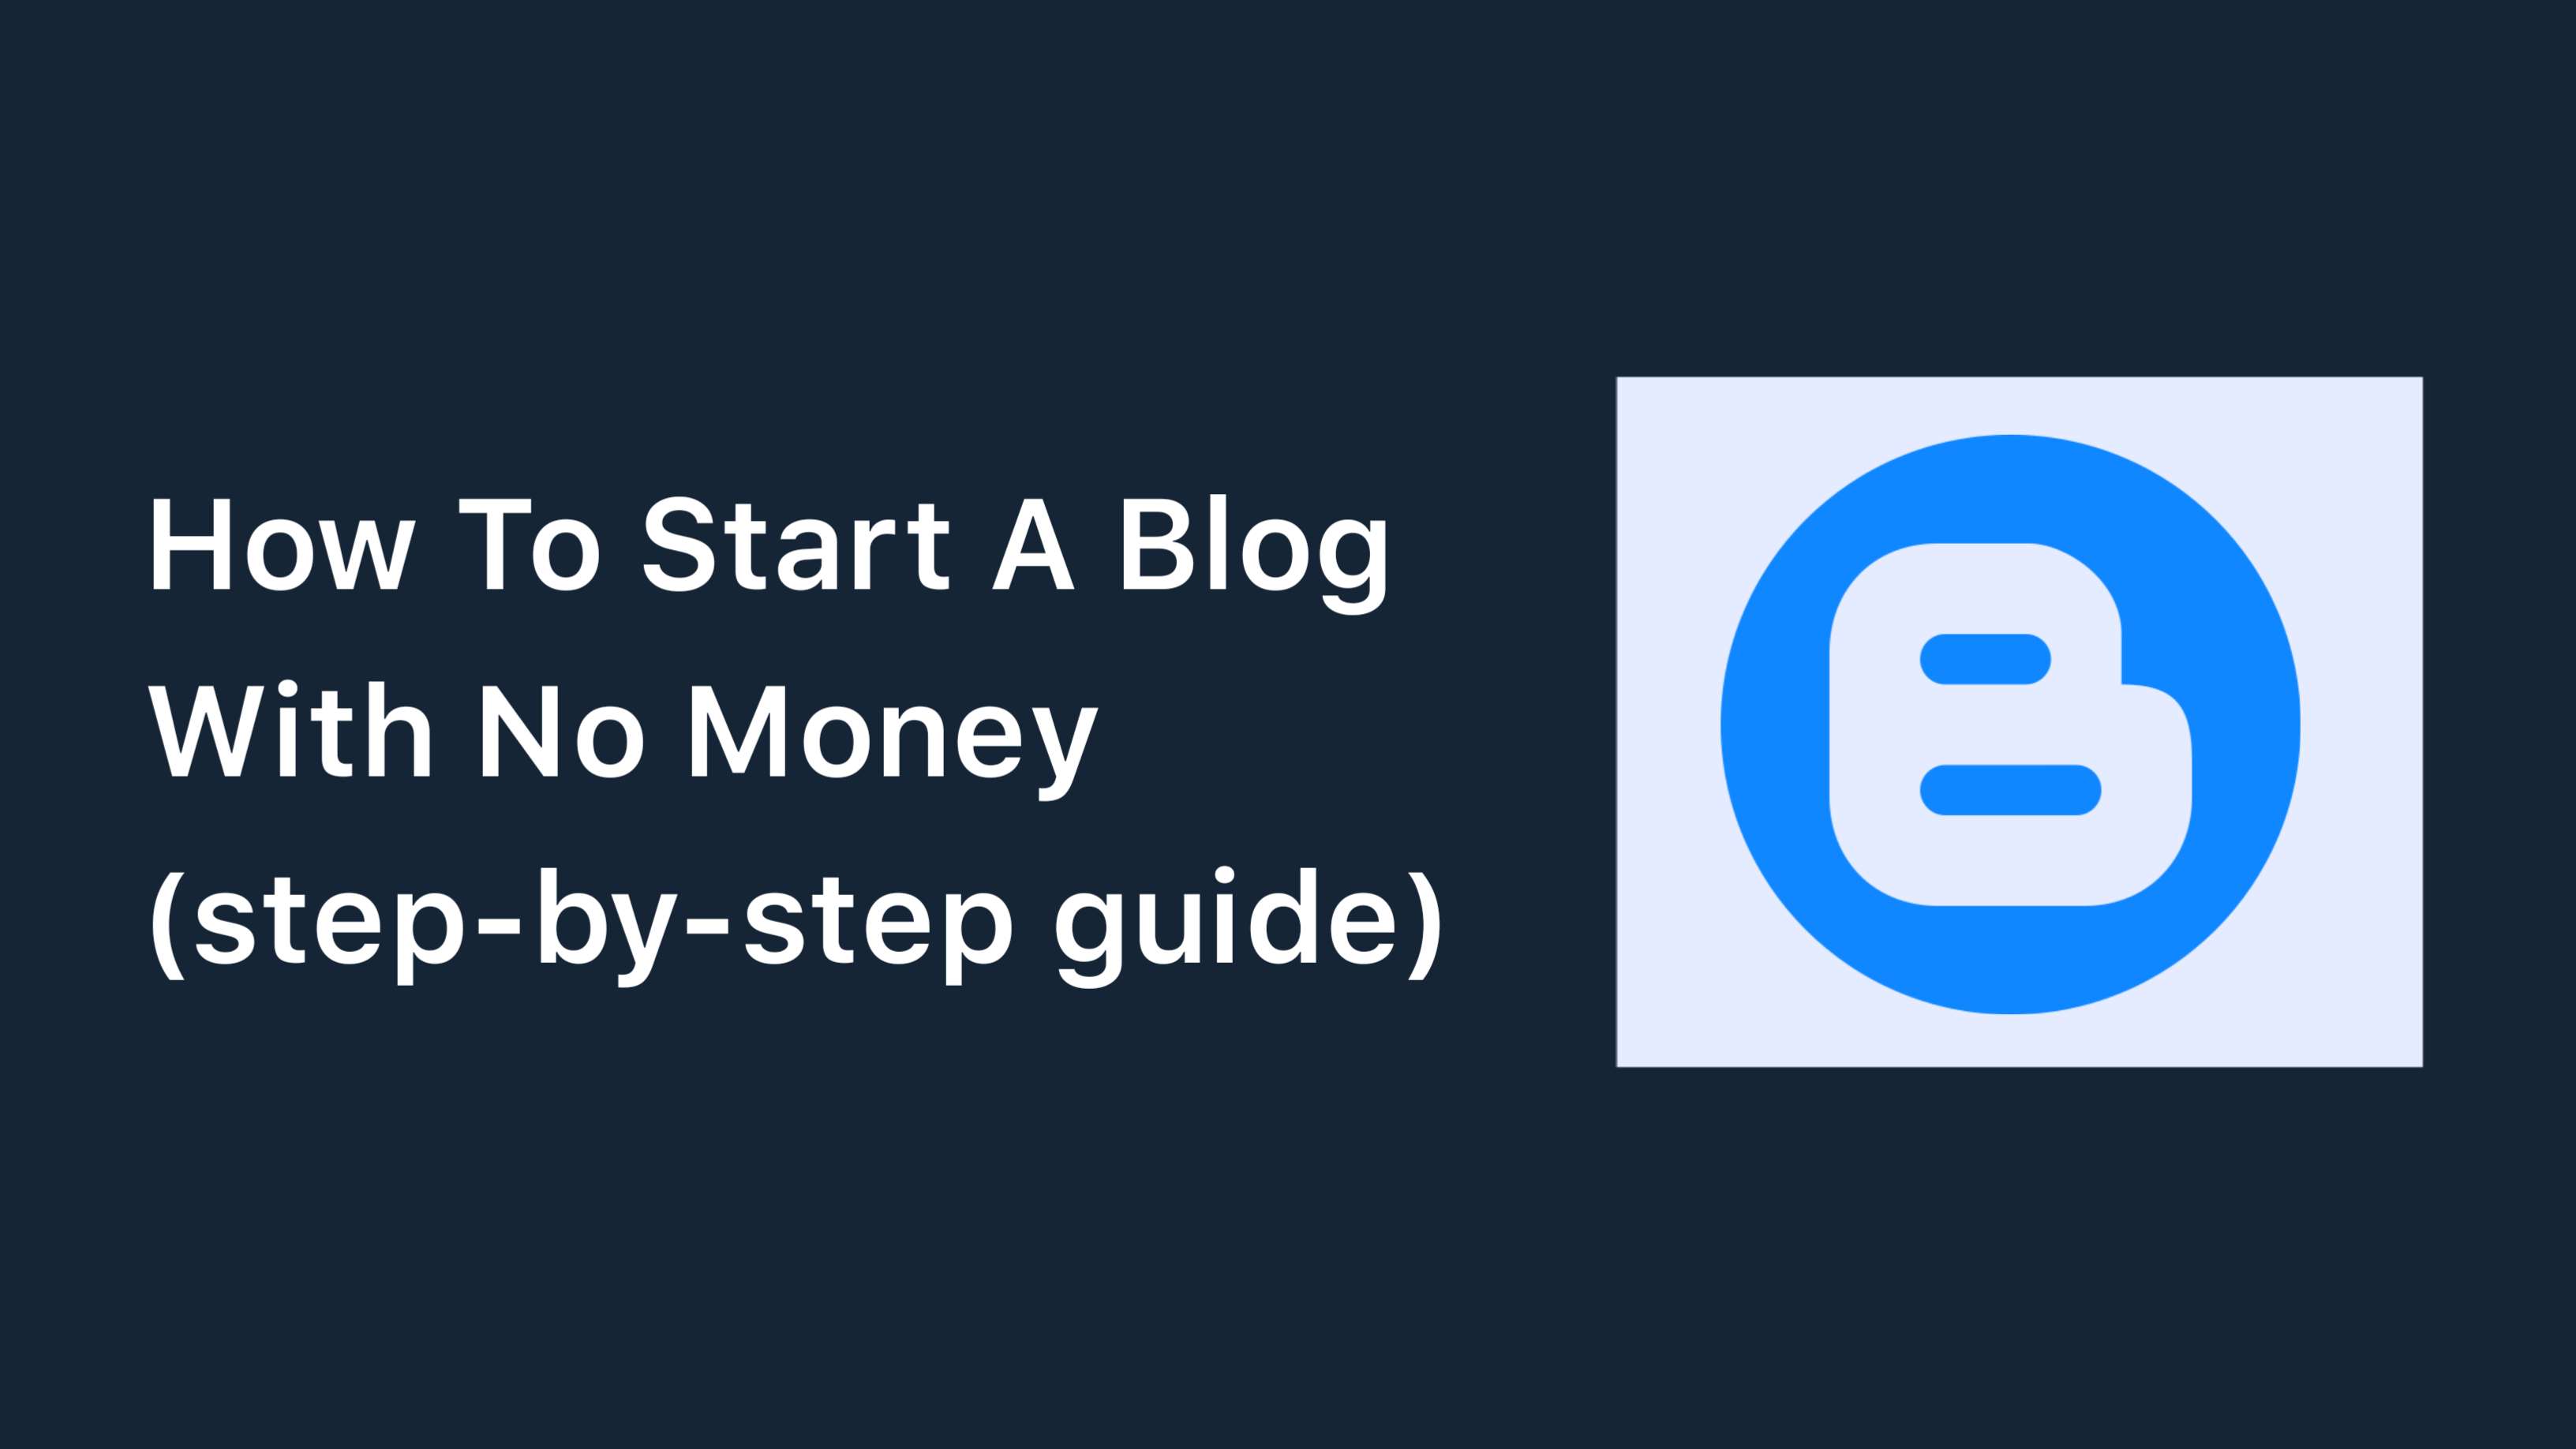 How To Start A Blog With No Money